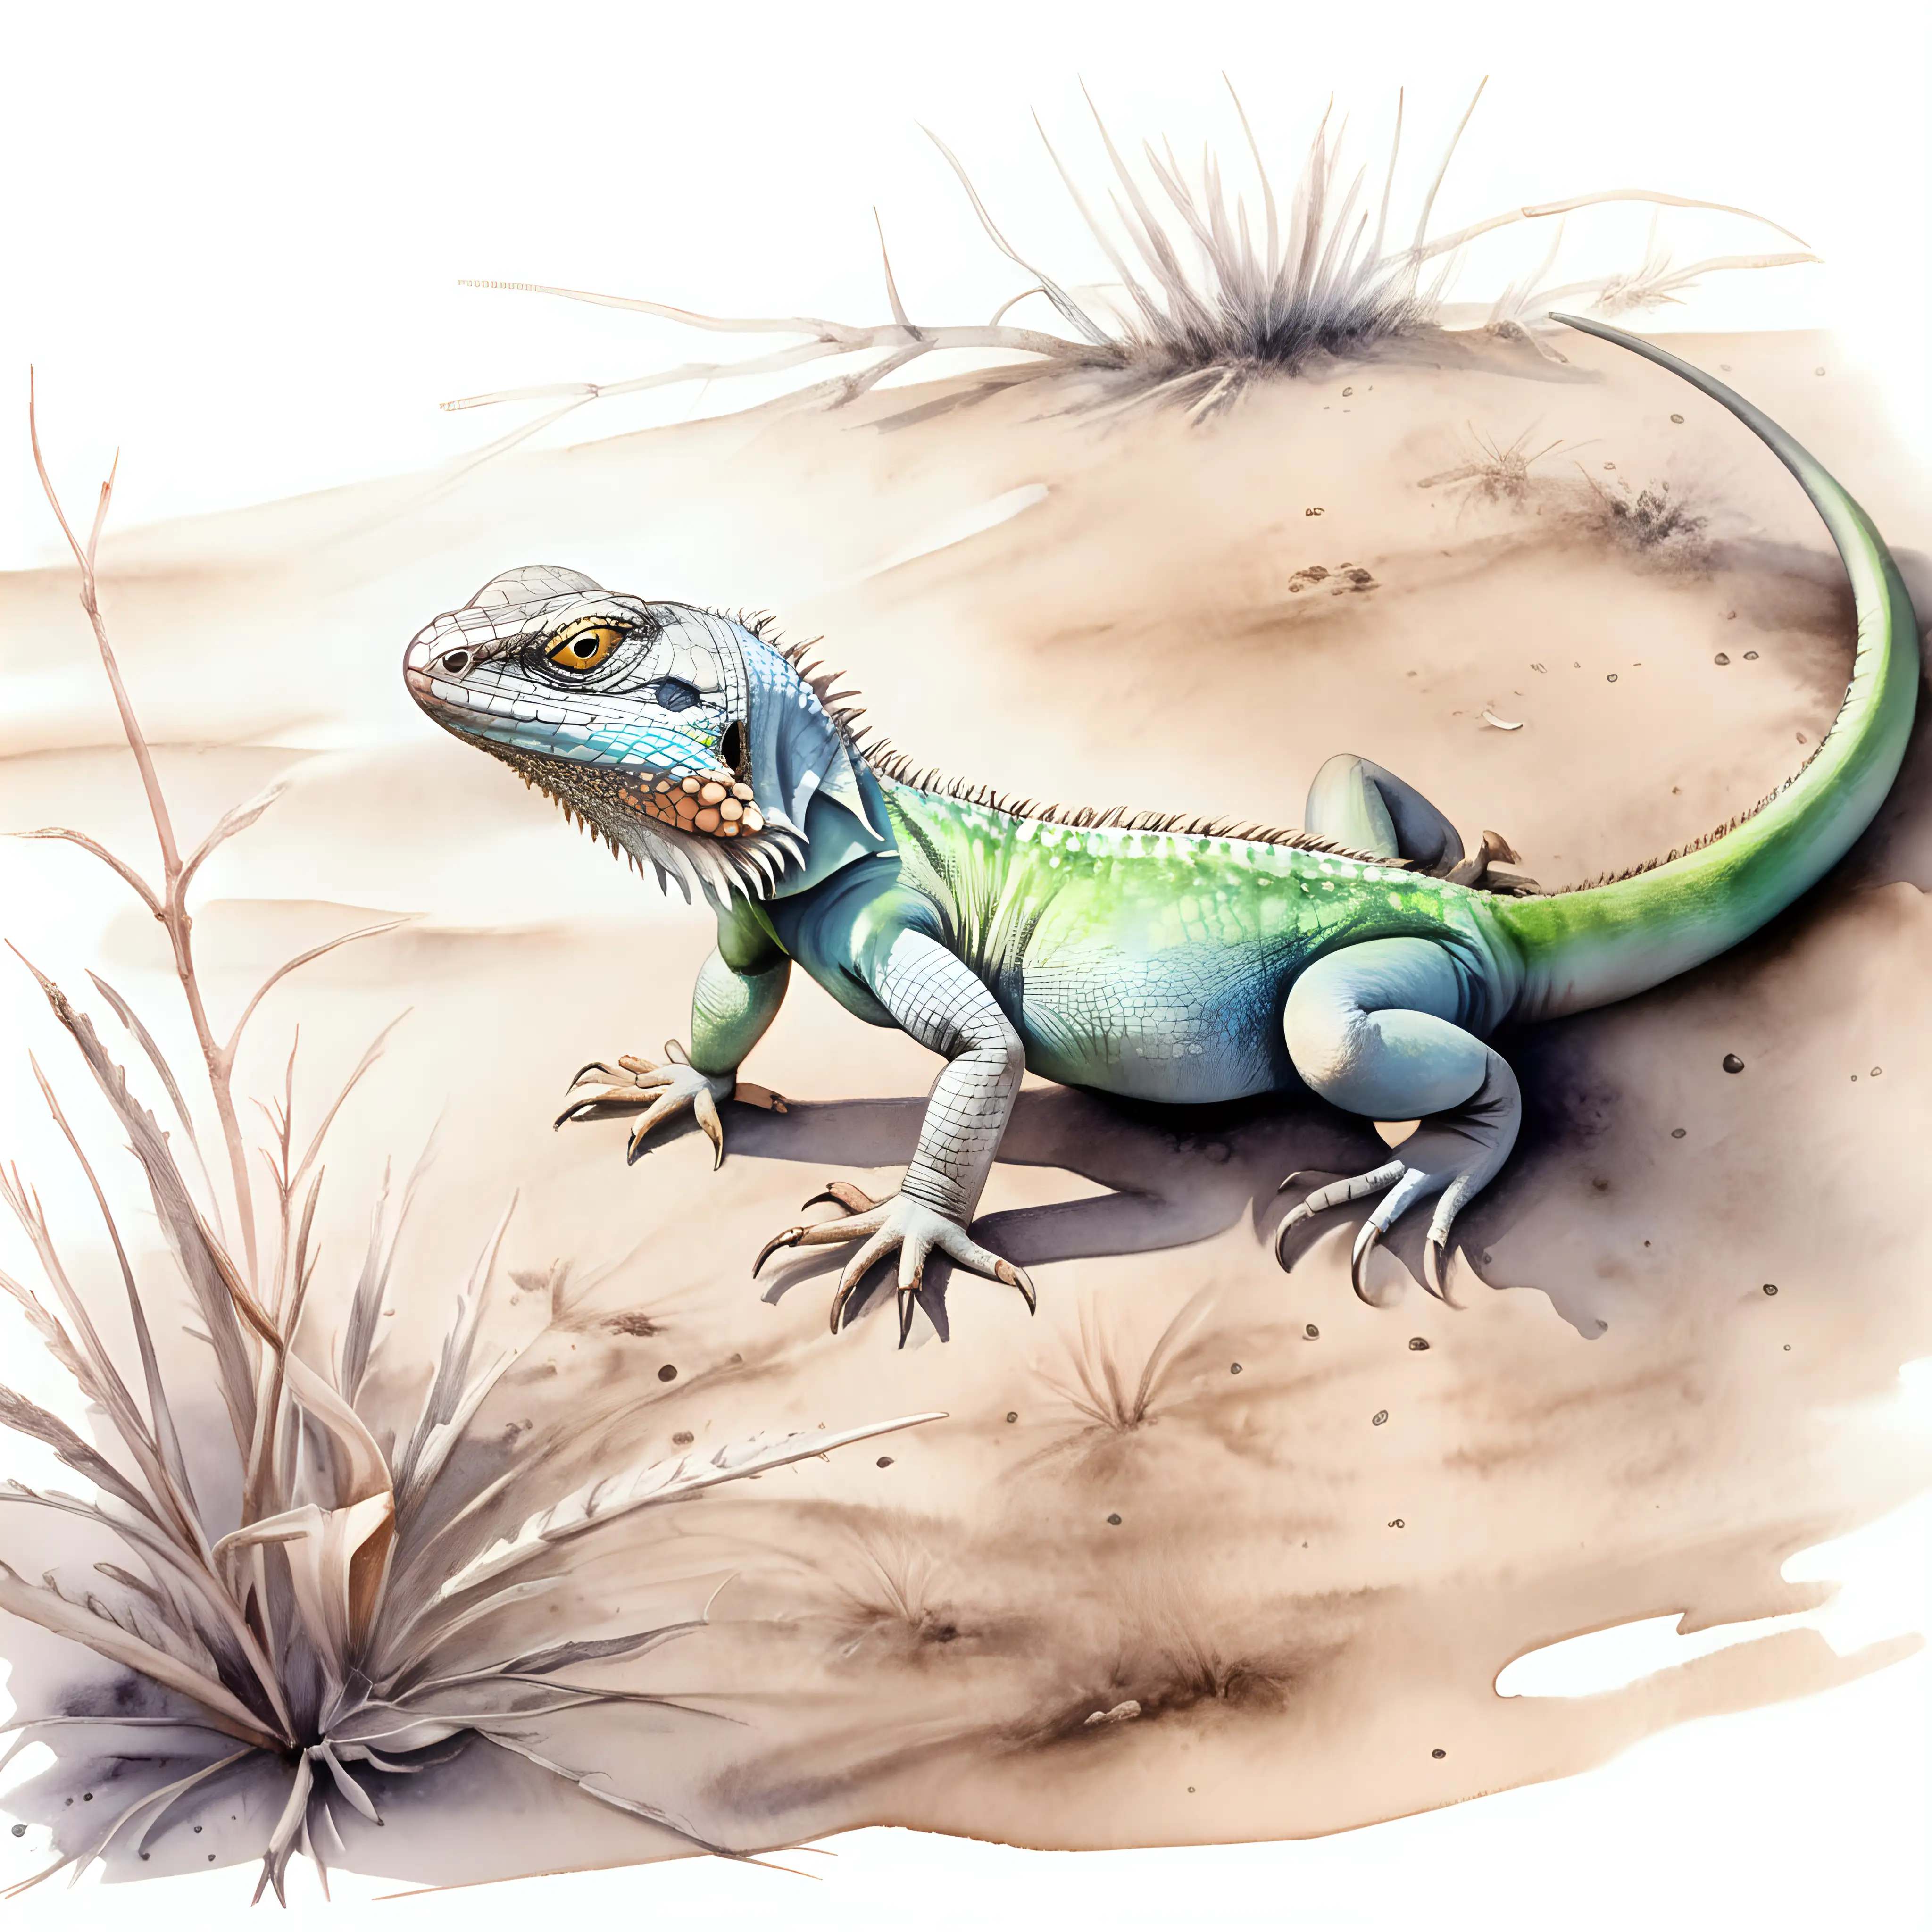 Dark Watercolor Drawing of a Lizard Crawling on the Ground